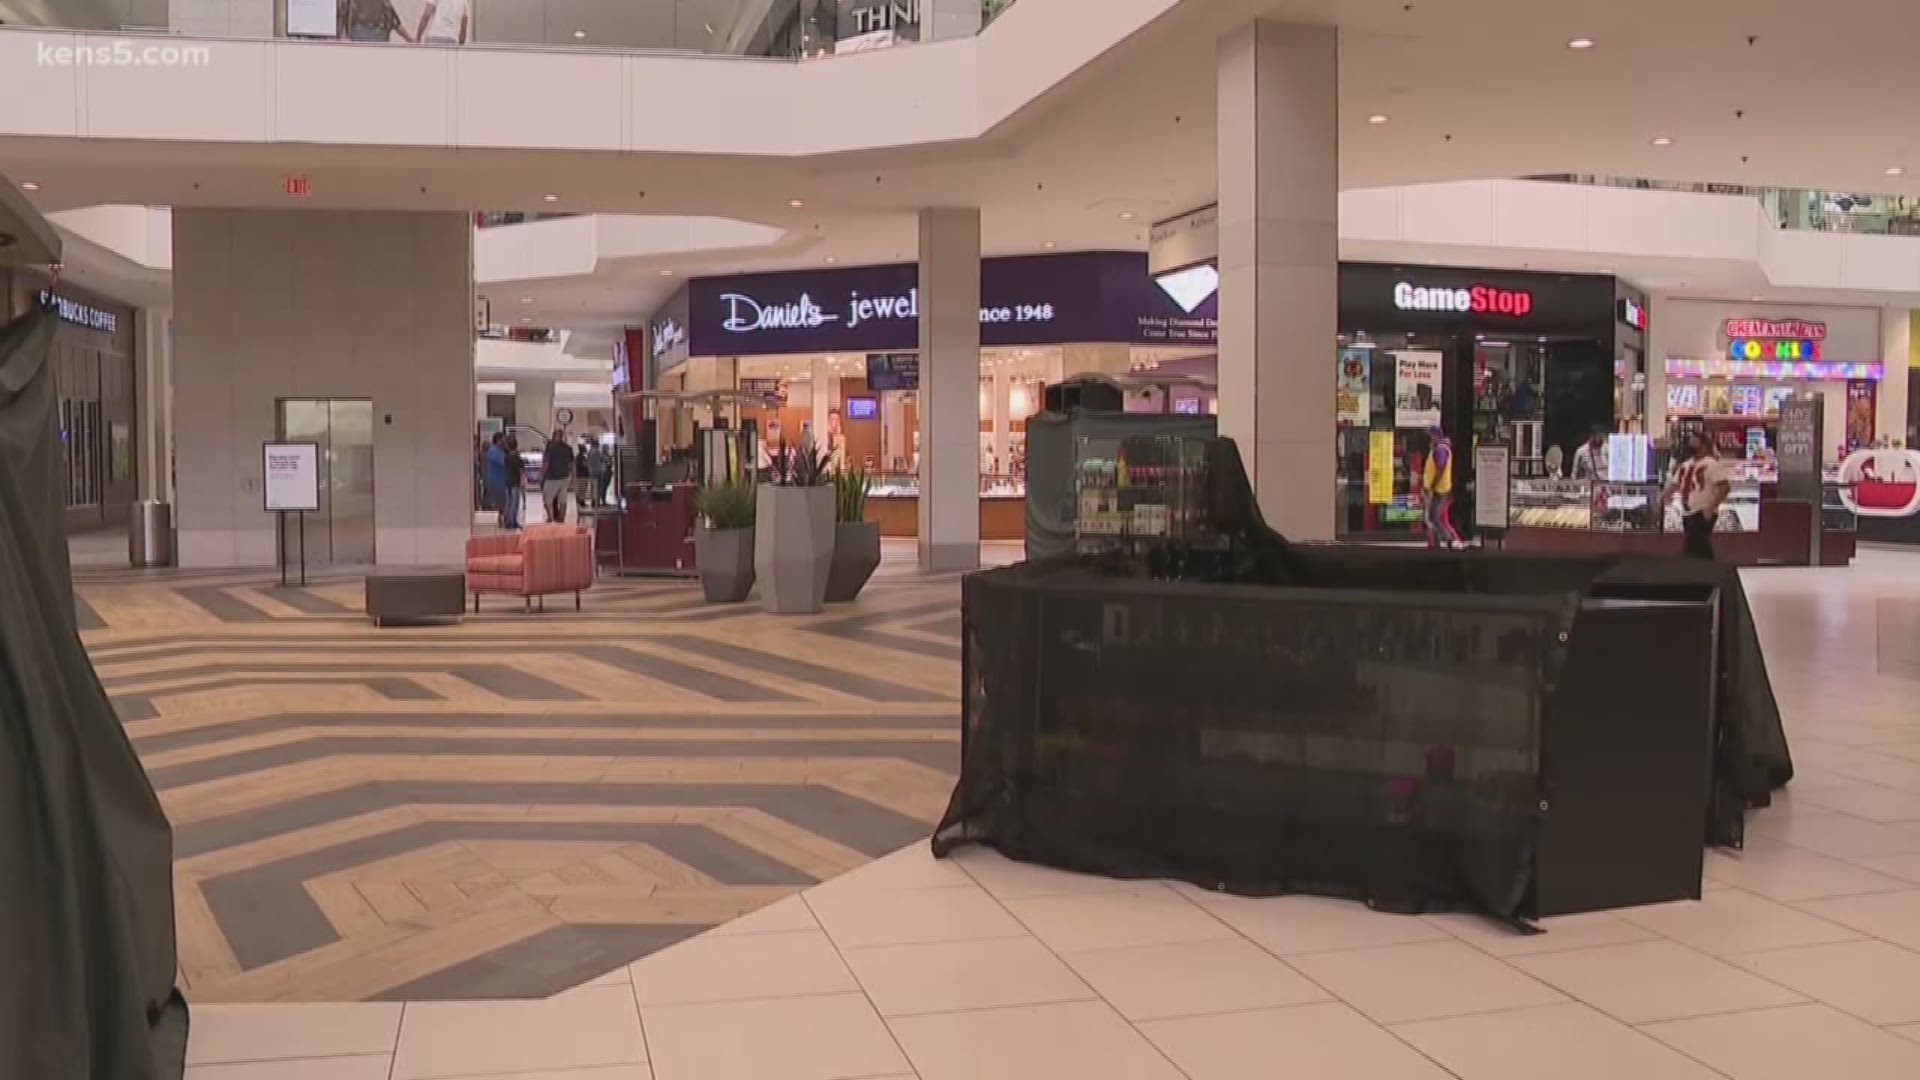 From The Pearl to Ingram Park Mall, some San Antonio businesses are reopening on May 1 with new restrictions to keep employees and customers as safe as possible.